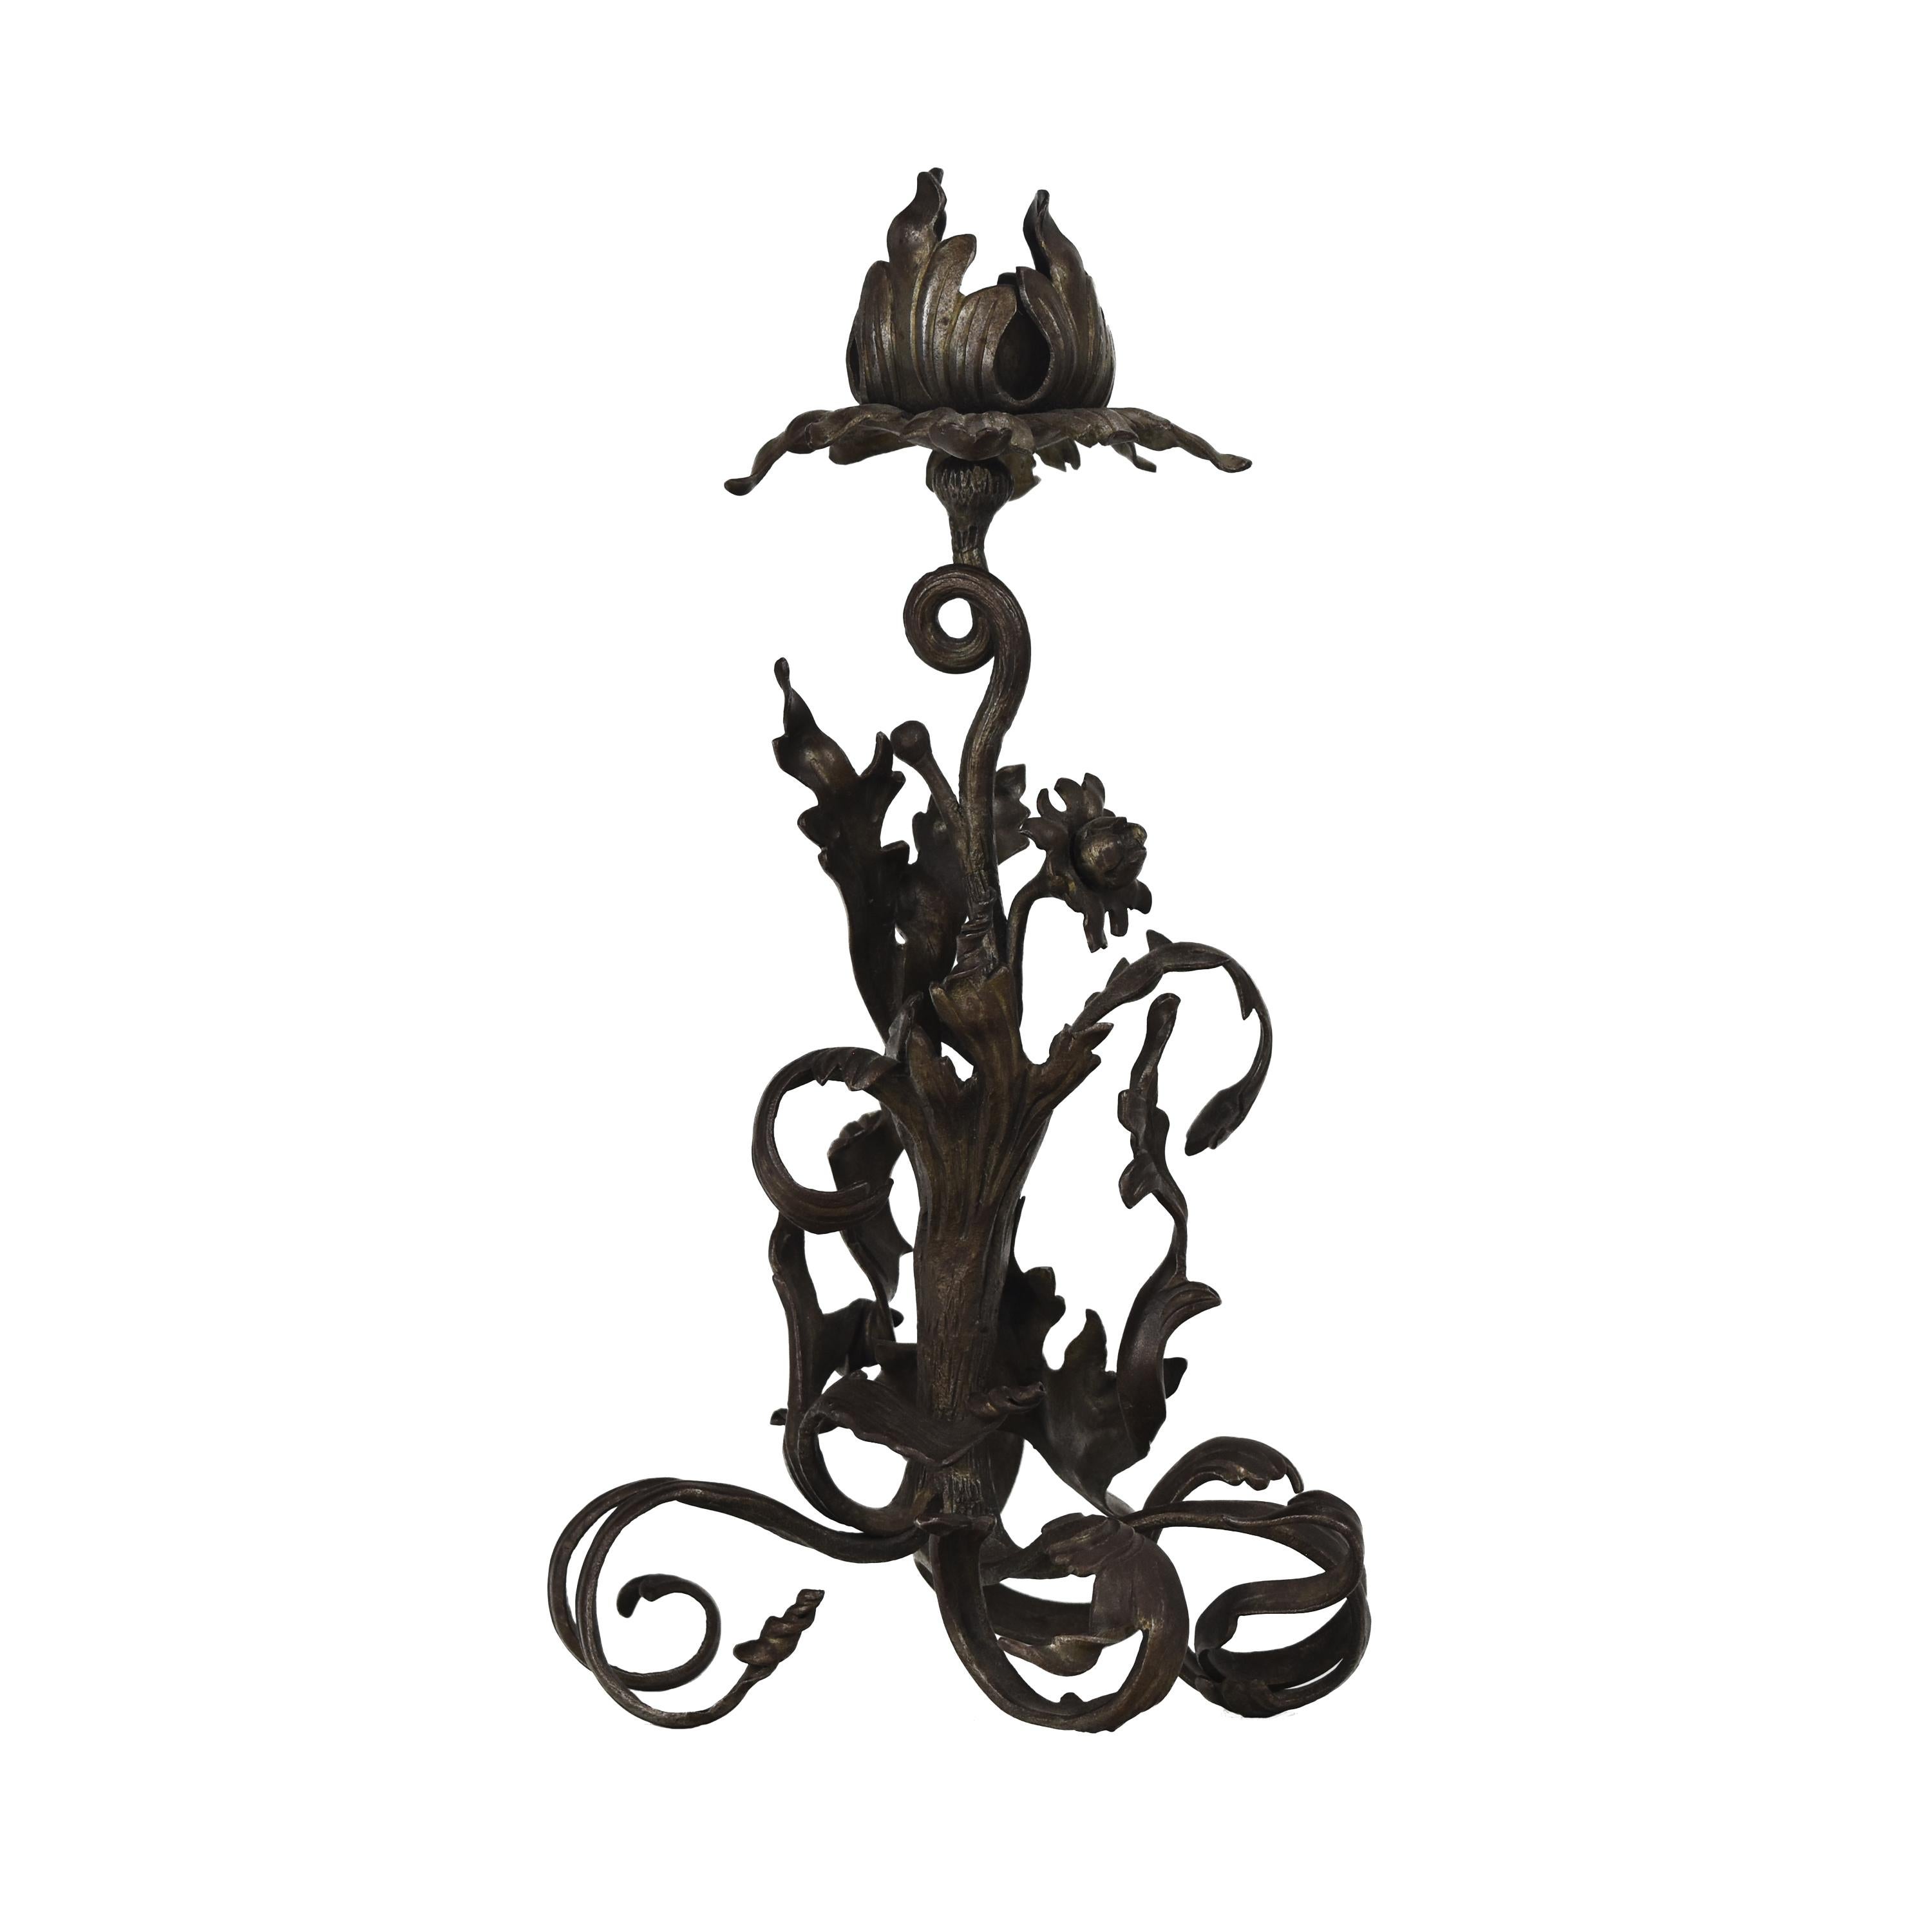 French Art Nouveau Hand Forged Iron Candlestick Candle Holder Majorelle Blossfeldt For Sale